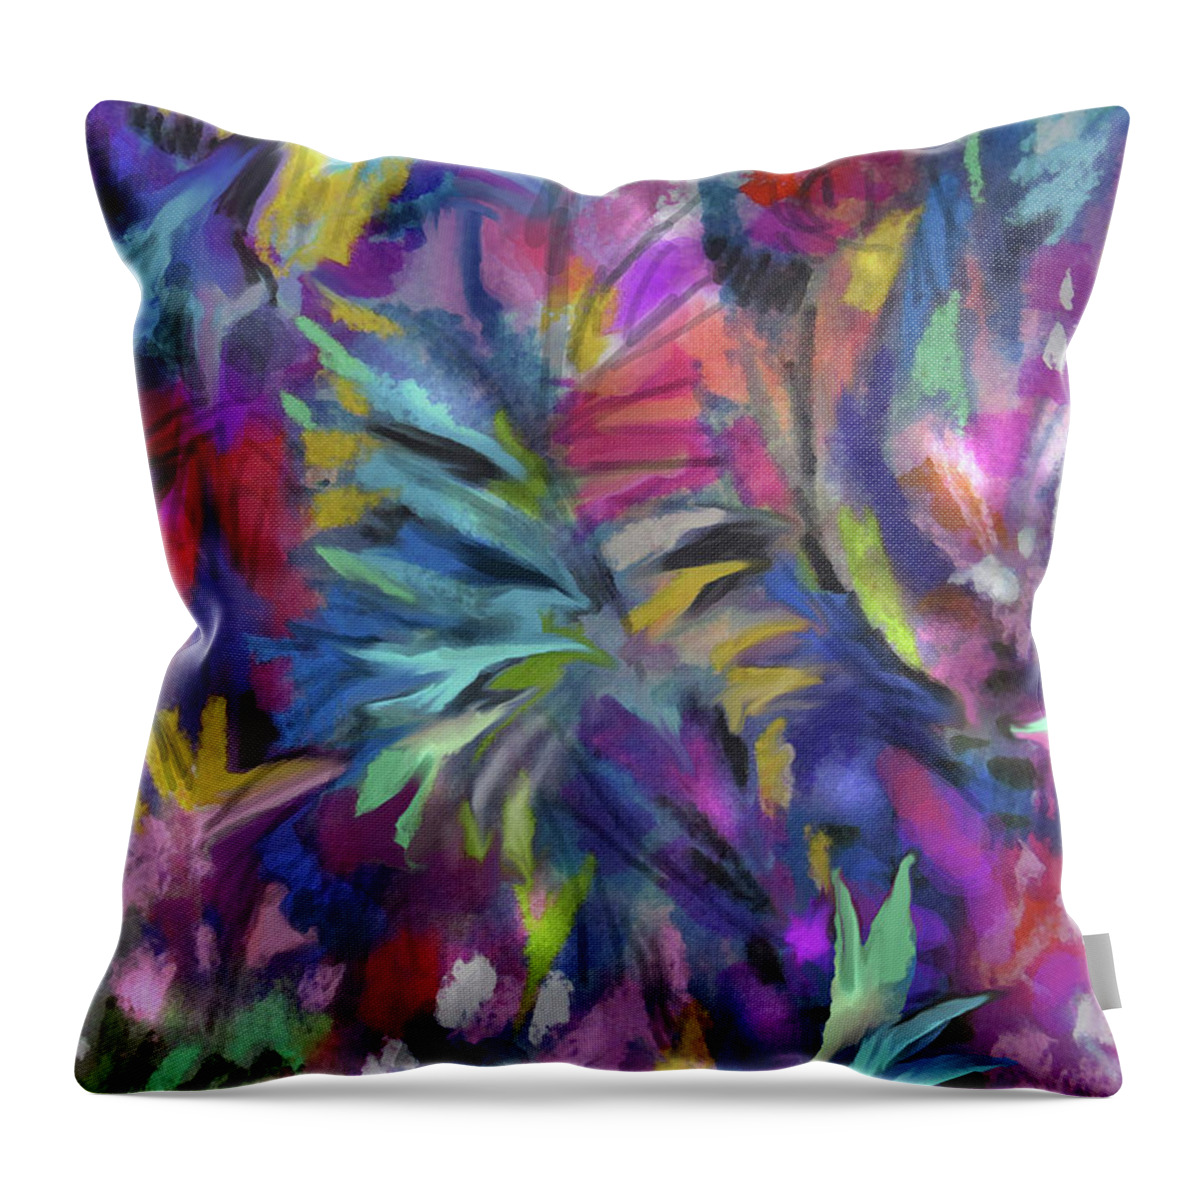 Vibrant Throw Pillow featuring the painting In the Garden of Eden by Jean Batzell Fitzgerald